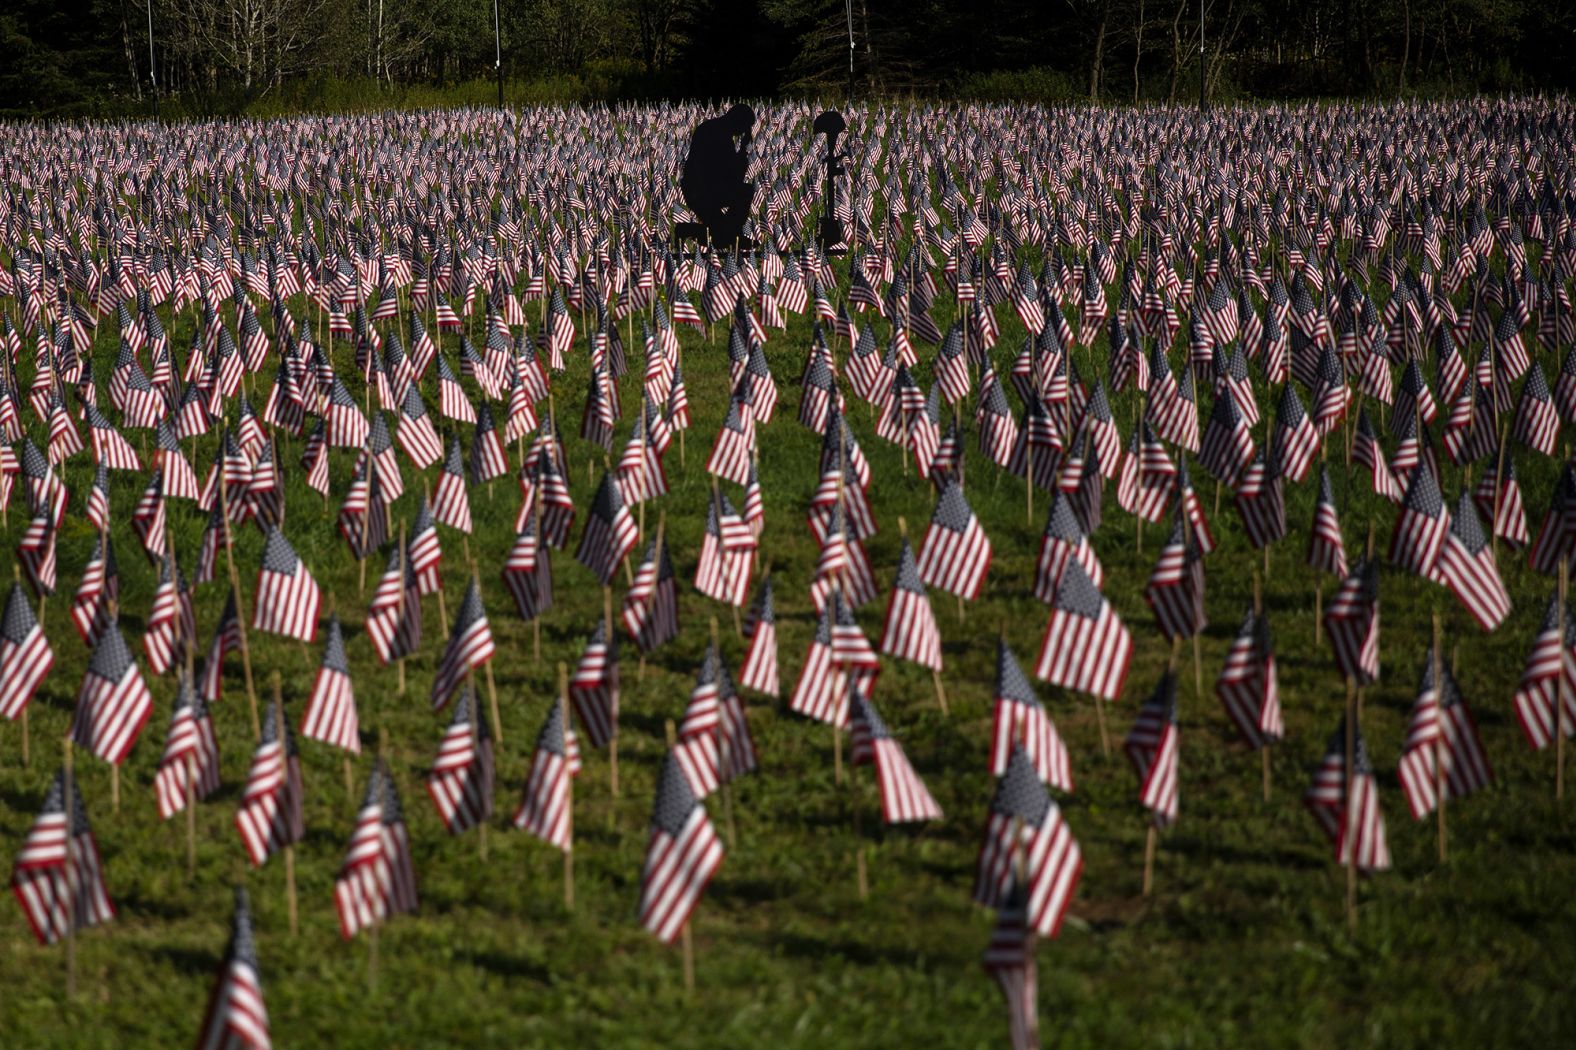 In Patriot Park near Shanksville, 7,049 flags are planted to honor the service members killed during the wars in Iraq and Afghanistan.